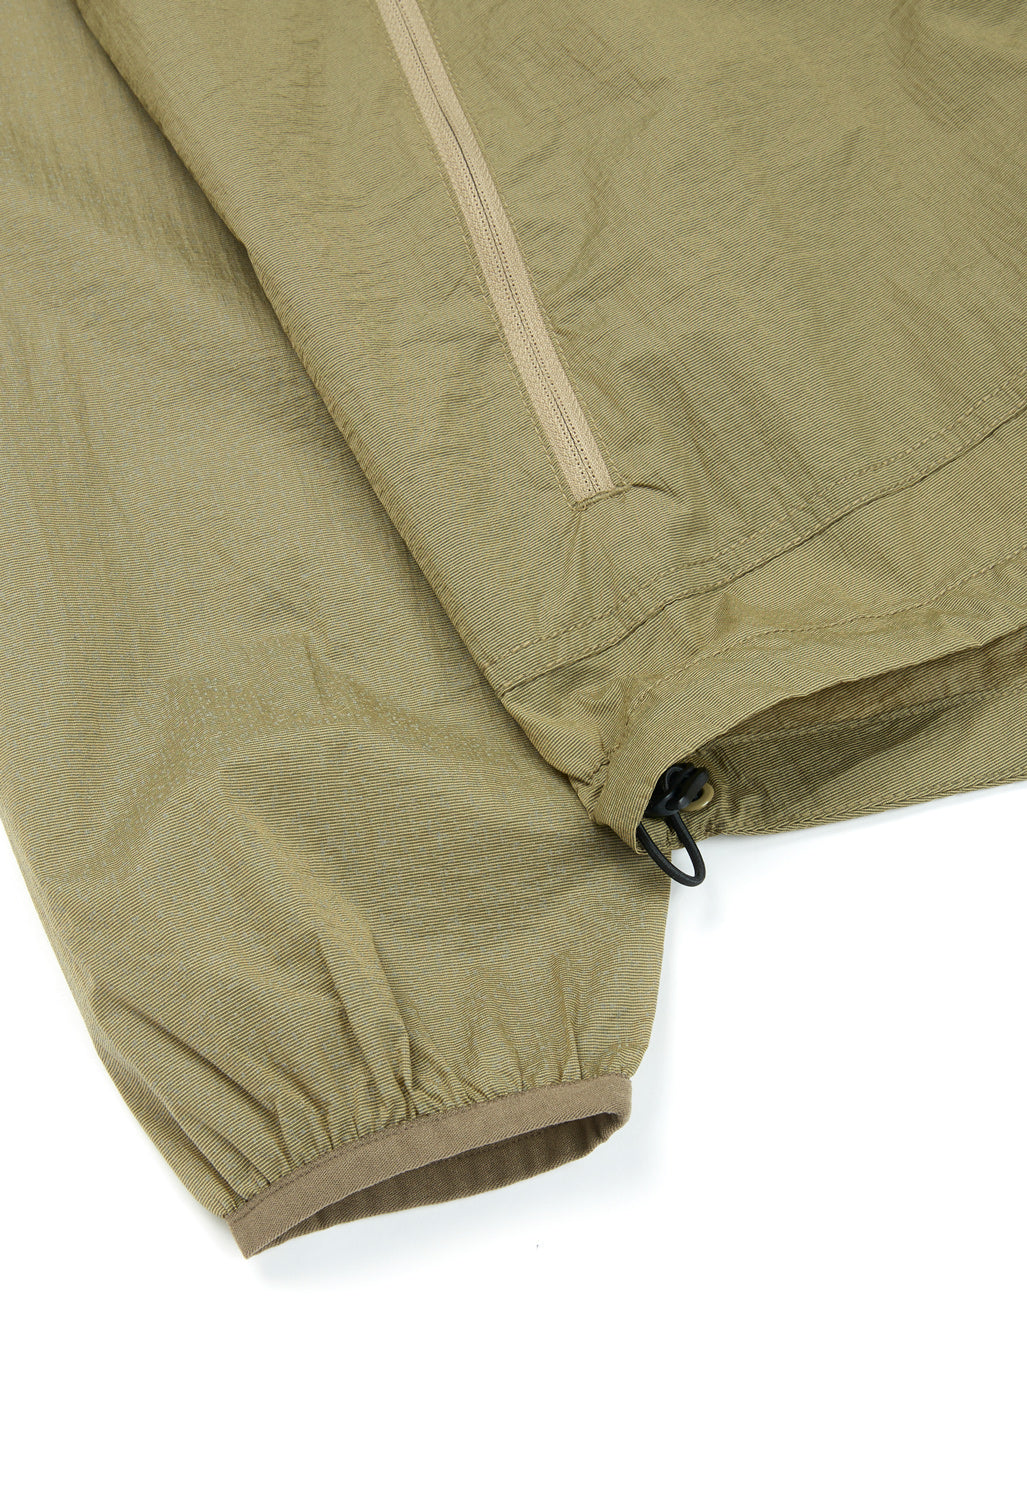 CAYL Reflect Wind Jacket  - Sand Brown